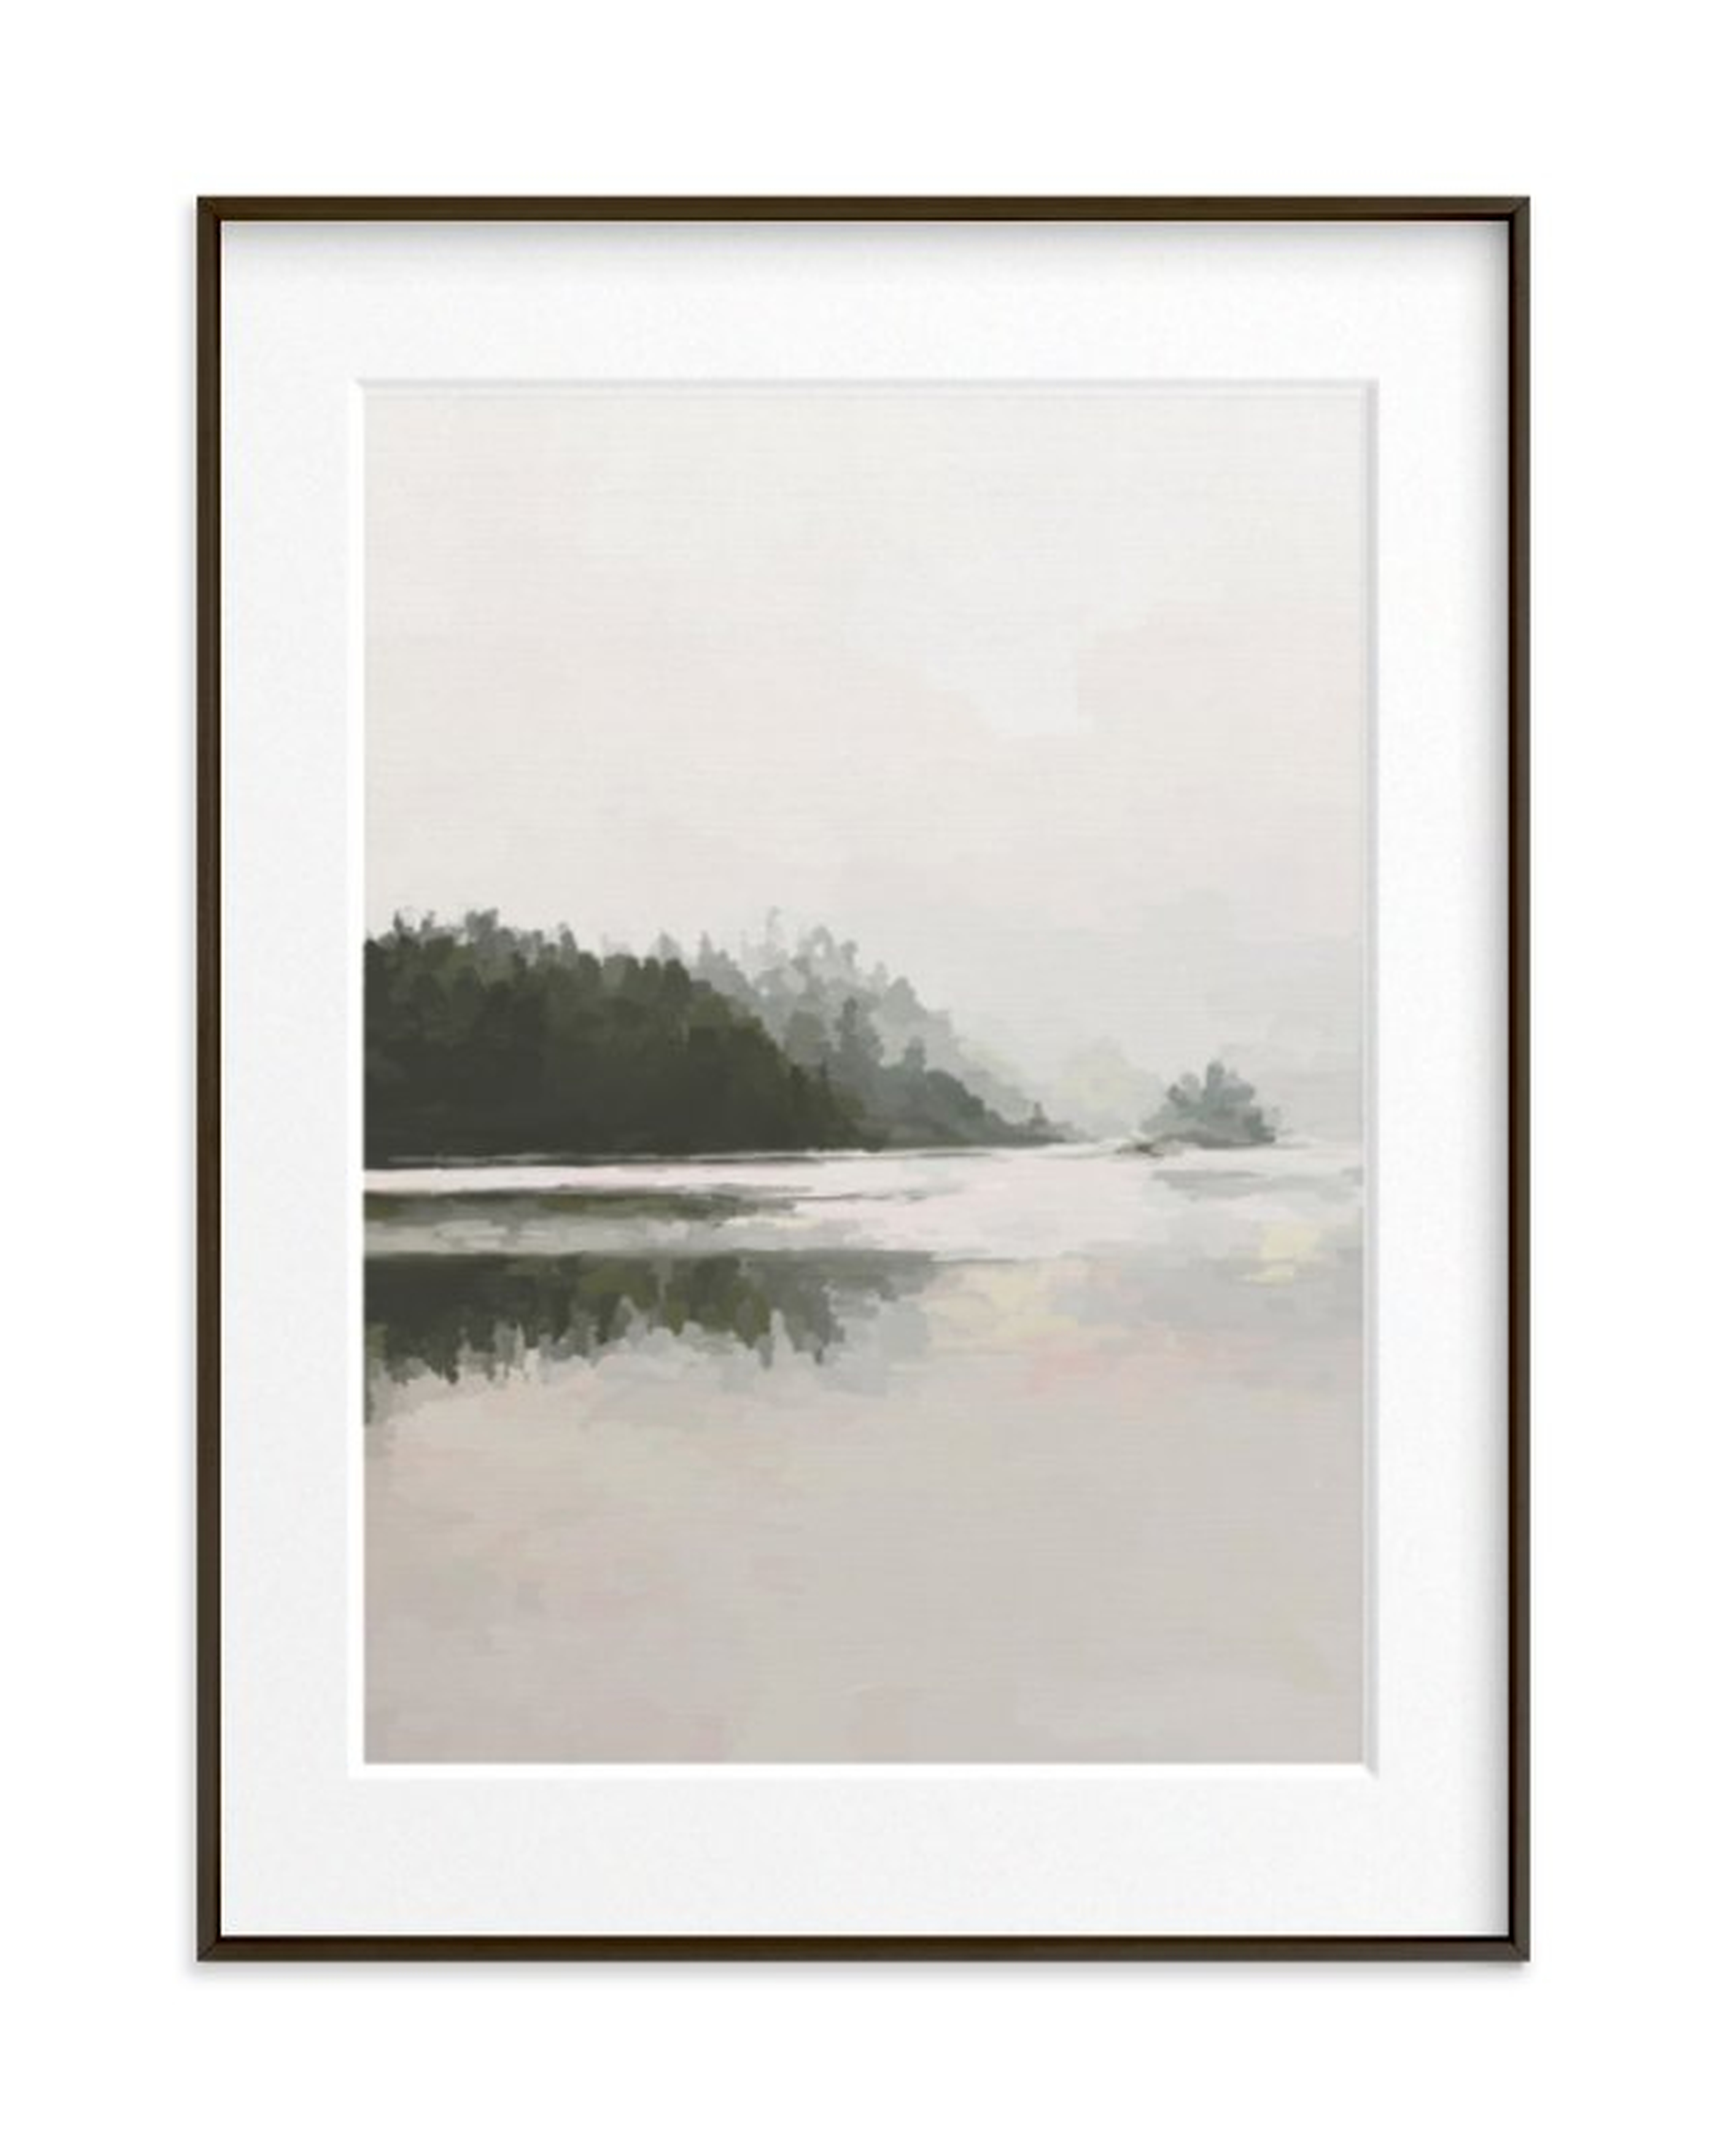 LakeView II - 18x24 - Matte Black Frame - Minted